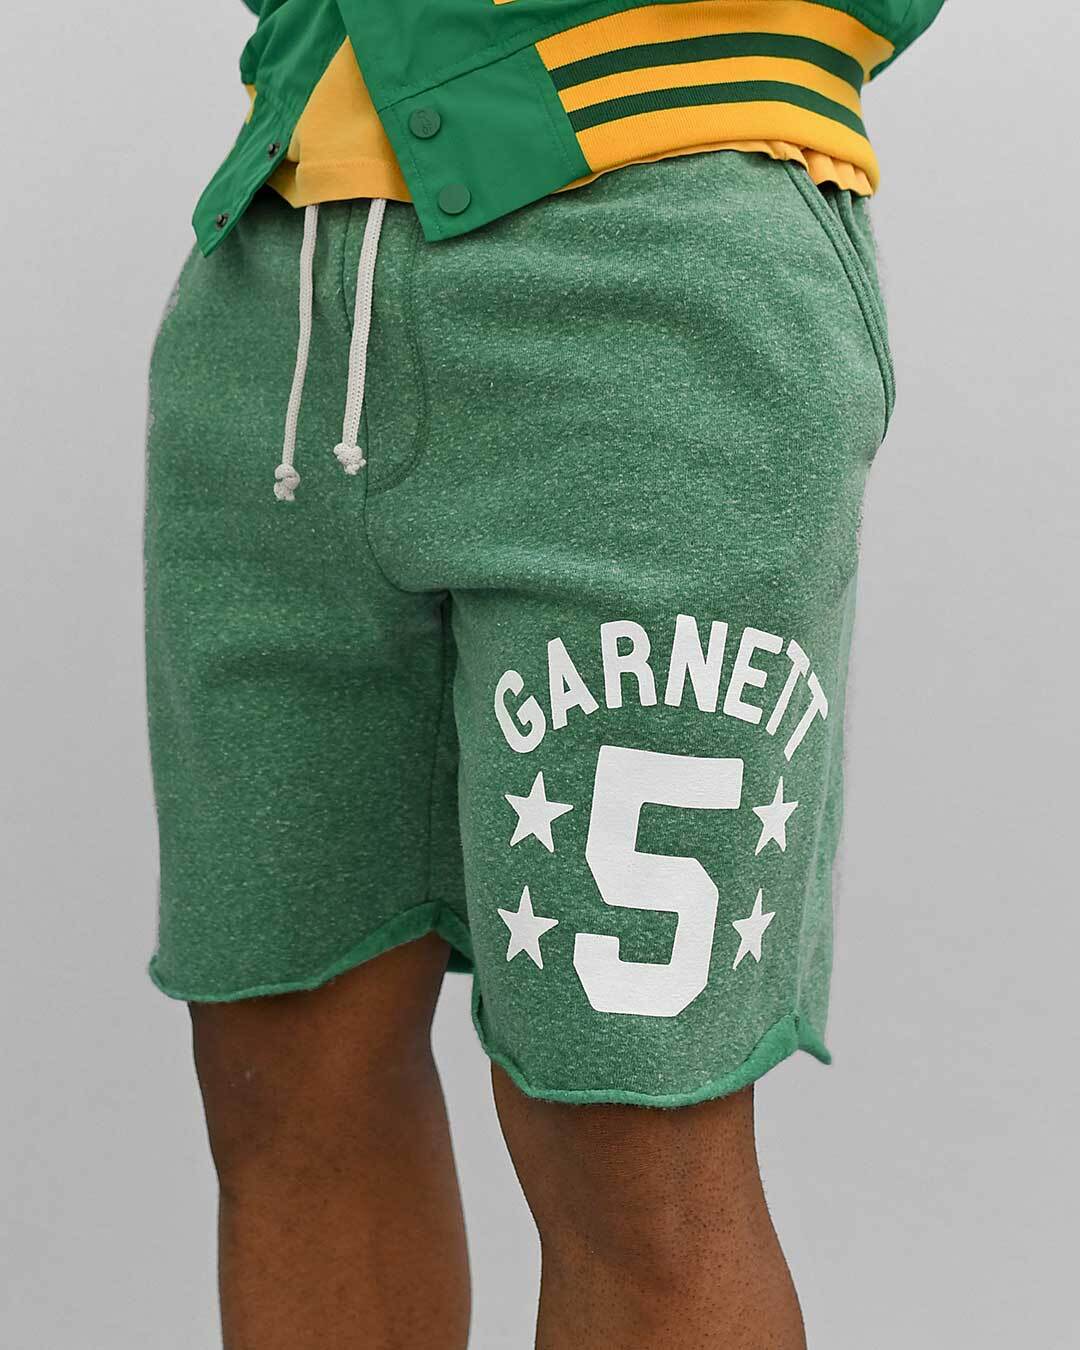 KG Boston Green Shorts - Roots of Fight Canada